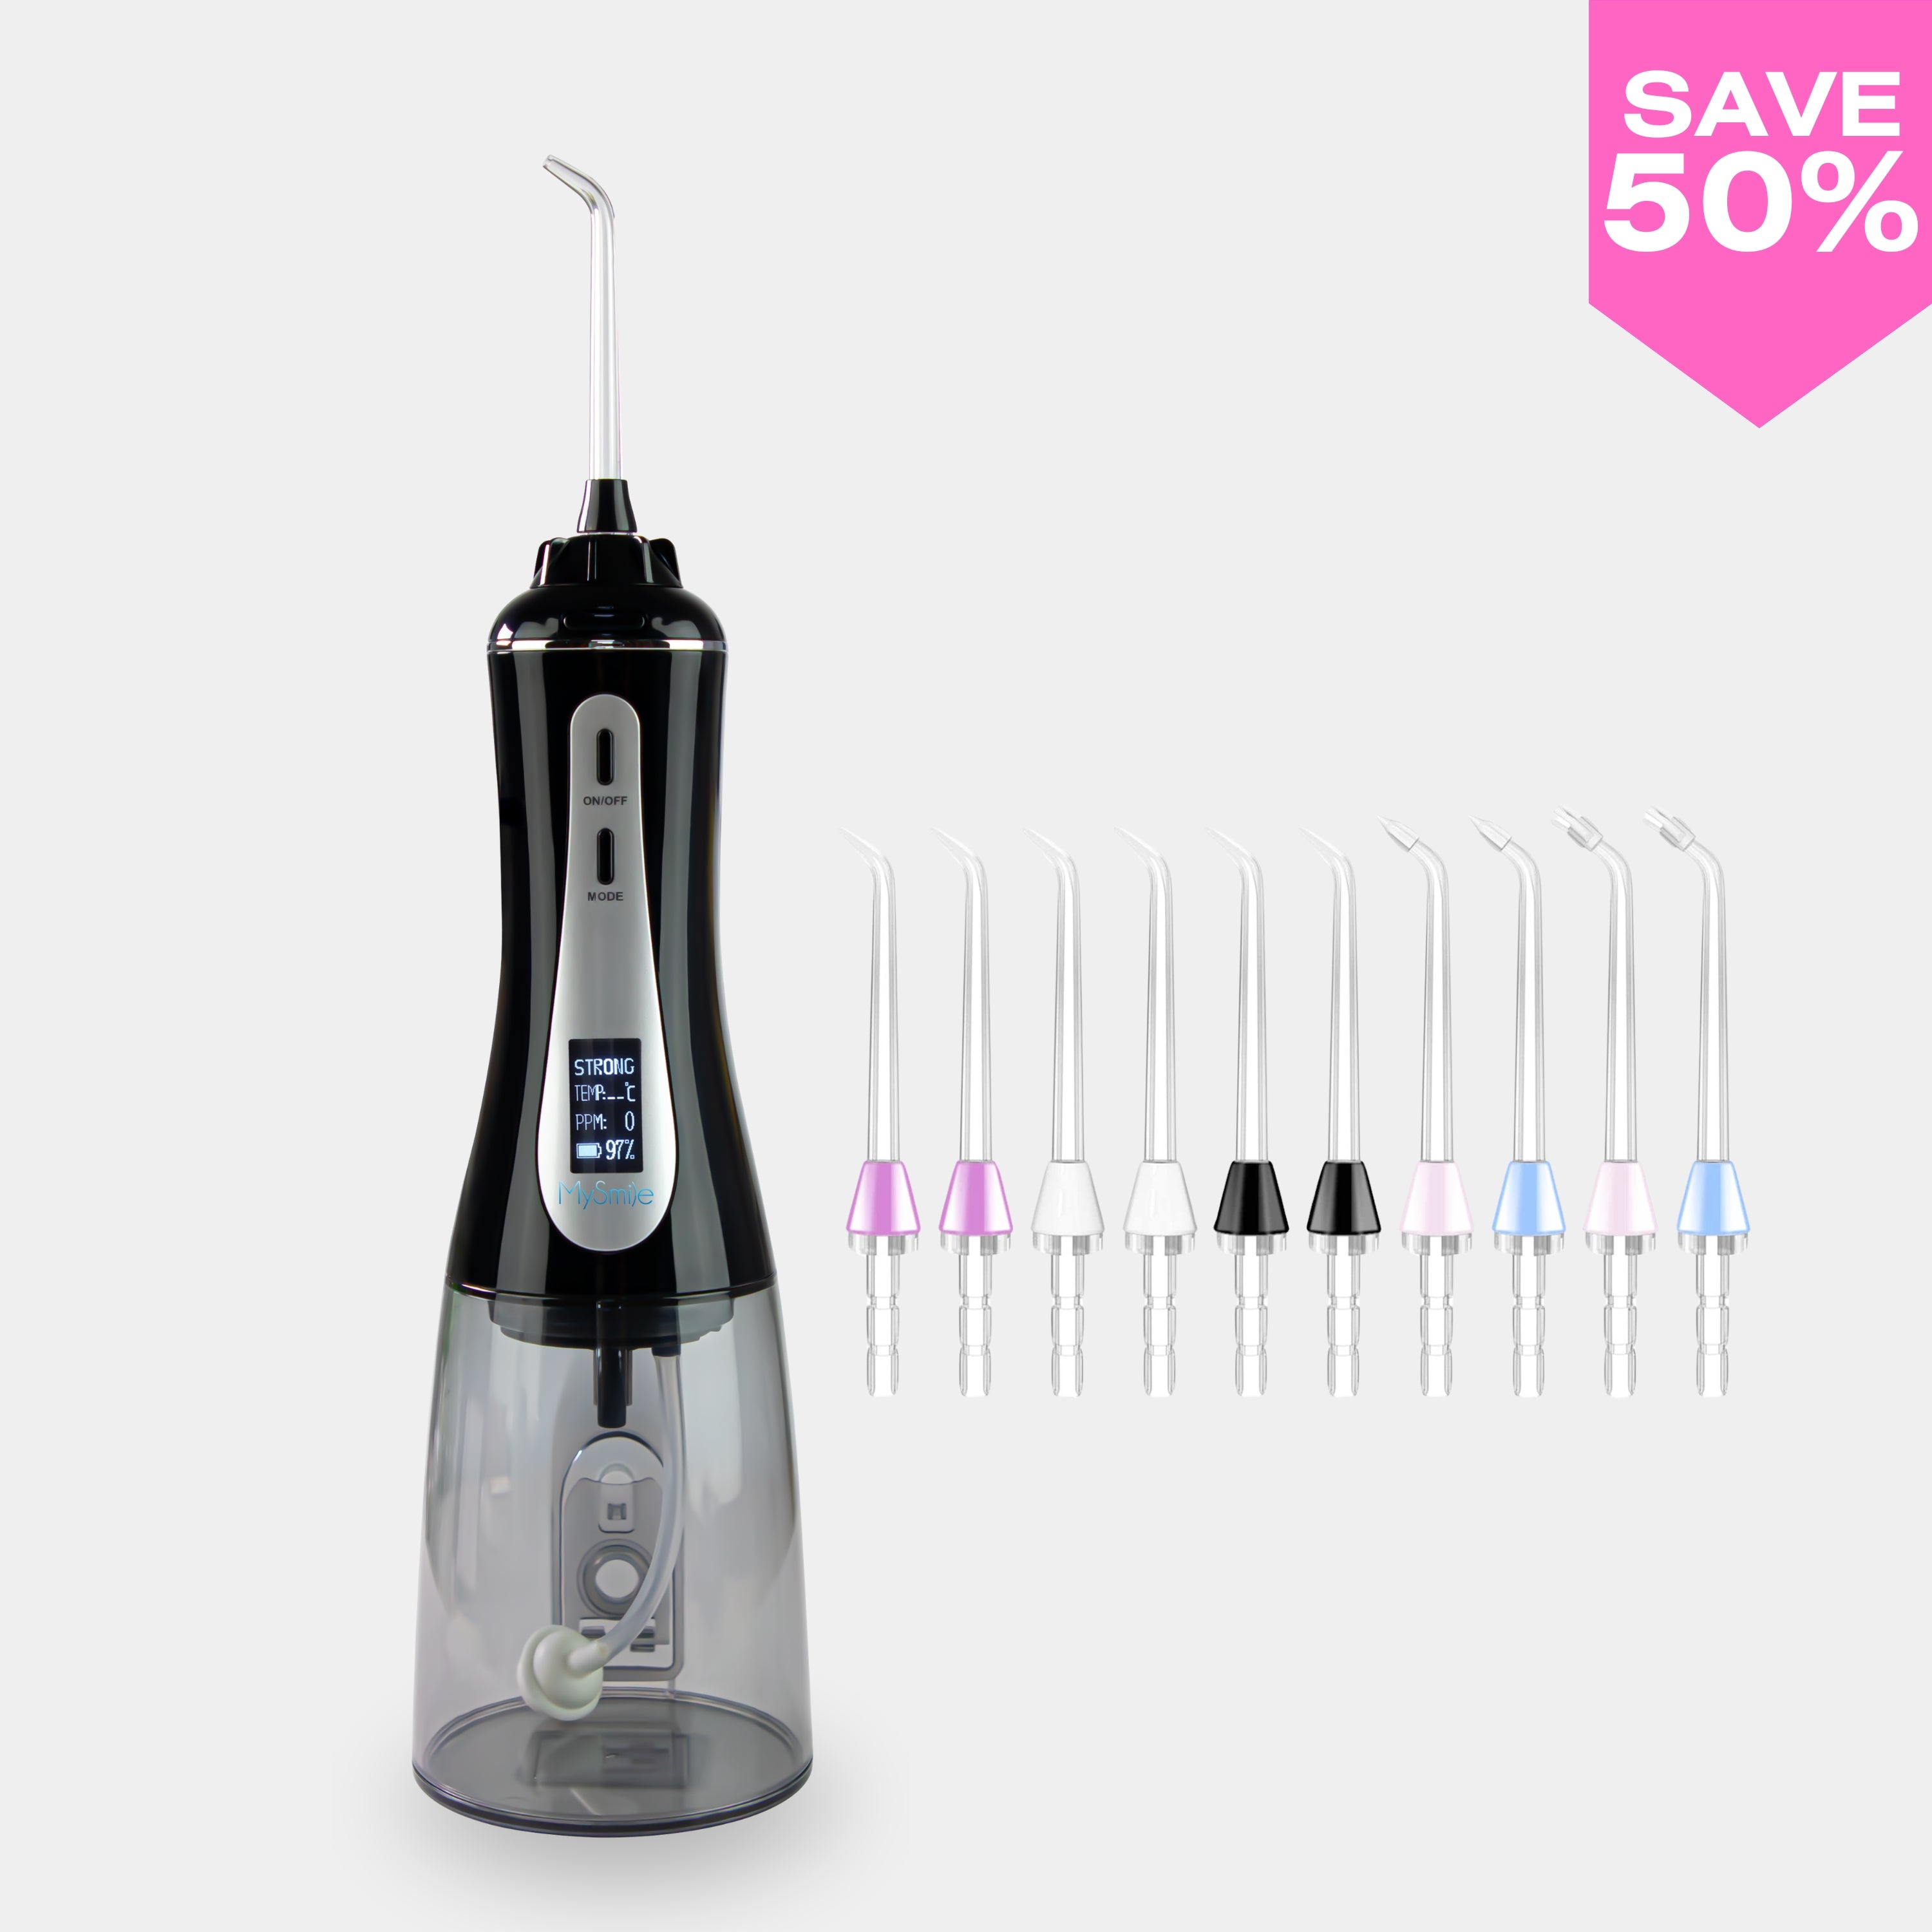 Advanced OLED Water Flosser & Replacement Tips Bundle